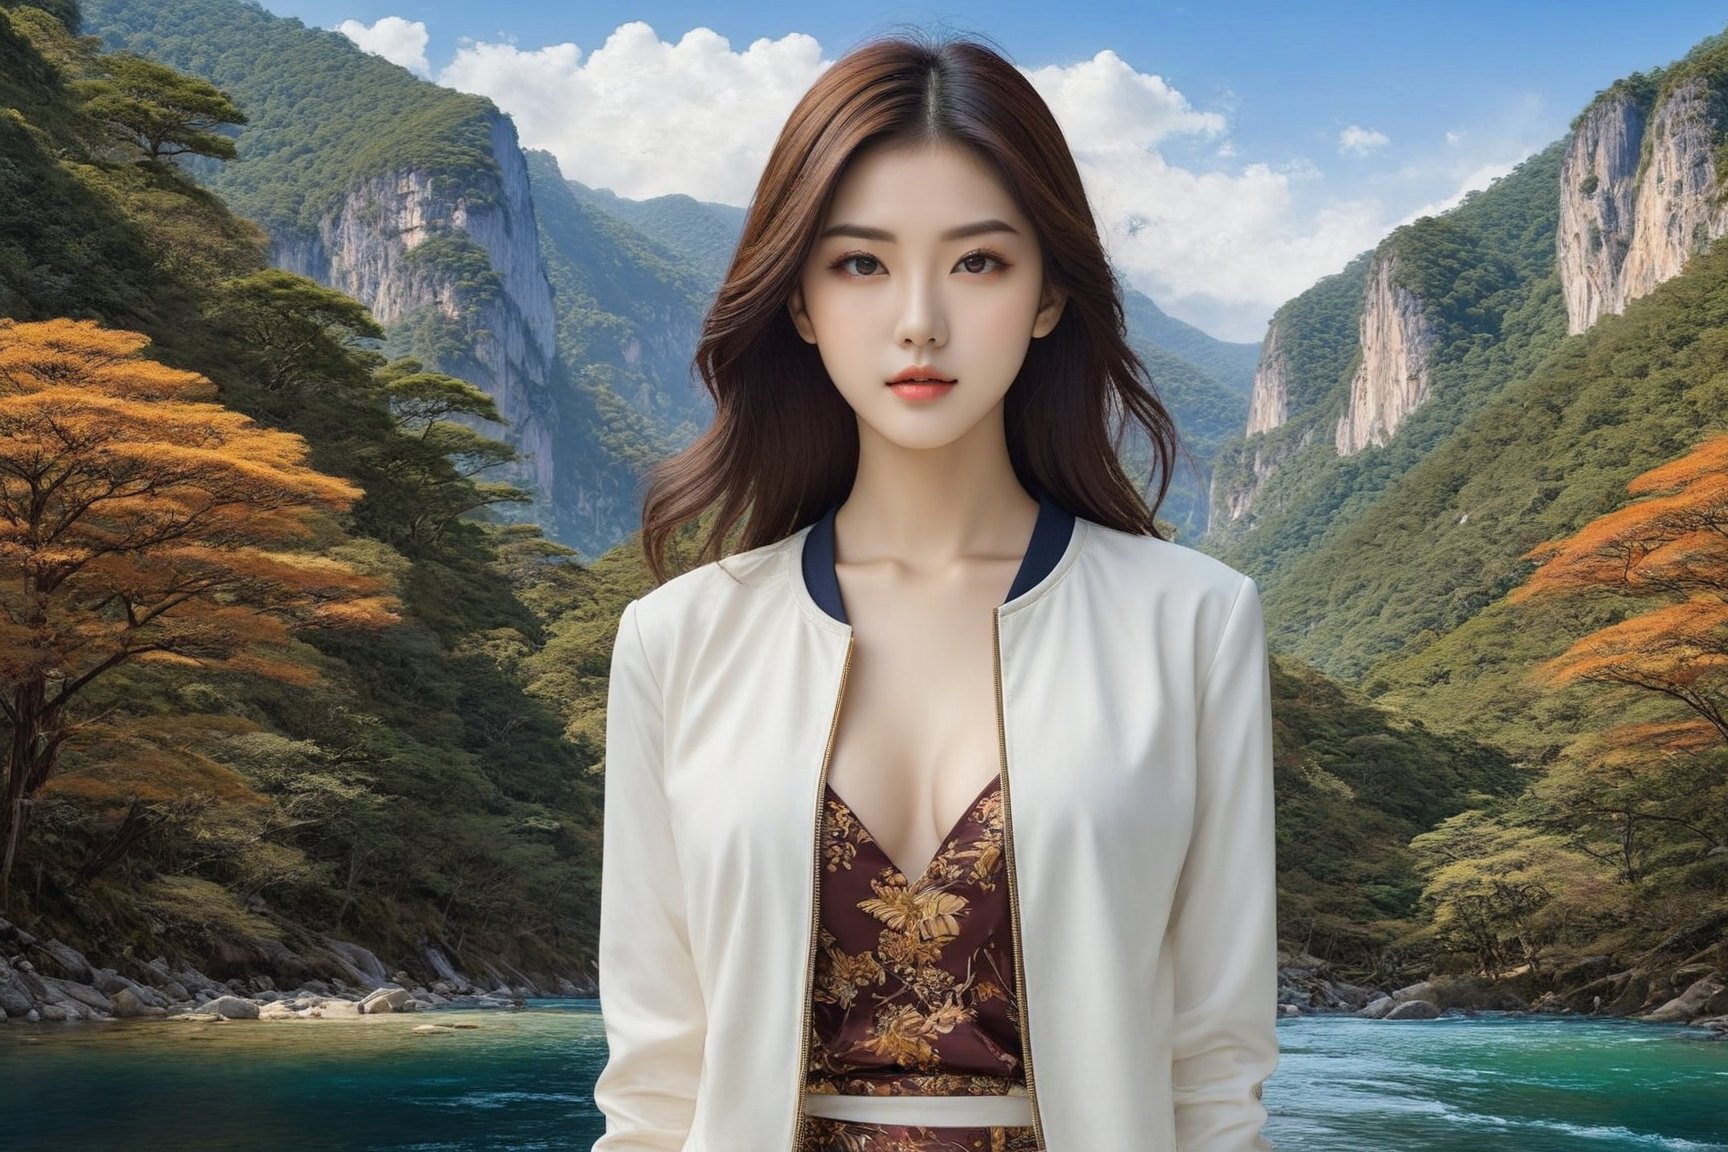 ((Hyper-Realistic)) photo of a beautiful girl standing in a national park,(kirishima touka),20yo,detailed exquisite face,detailed soft skin,hourglass figure,perfect female form,model body,(perfect hands:1.2),(elegant jacket, shirt and skirt),(backdrop: beautiful mountain with river,lake,tree, forest,rock and reflection in water),(girl and mountain focus),v1sta3
BREAK 
aesthetic,rule of thirds,depth of perspective,perfect composition,studio photo,trending on artstation,cinematic lighting,(Hyper-realistic photography,masterpiece, photorealistic,ultra-detailed,intricate details,16K,sharp focus,high contrast,kodachrome 800,HDR:1.2),by Karol Bak,Gustav Klimt and Hayao Miyazaki, real_booster,art_booster,ani_booster,y0sem1te,H effect